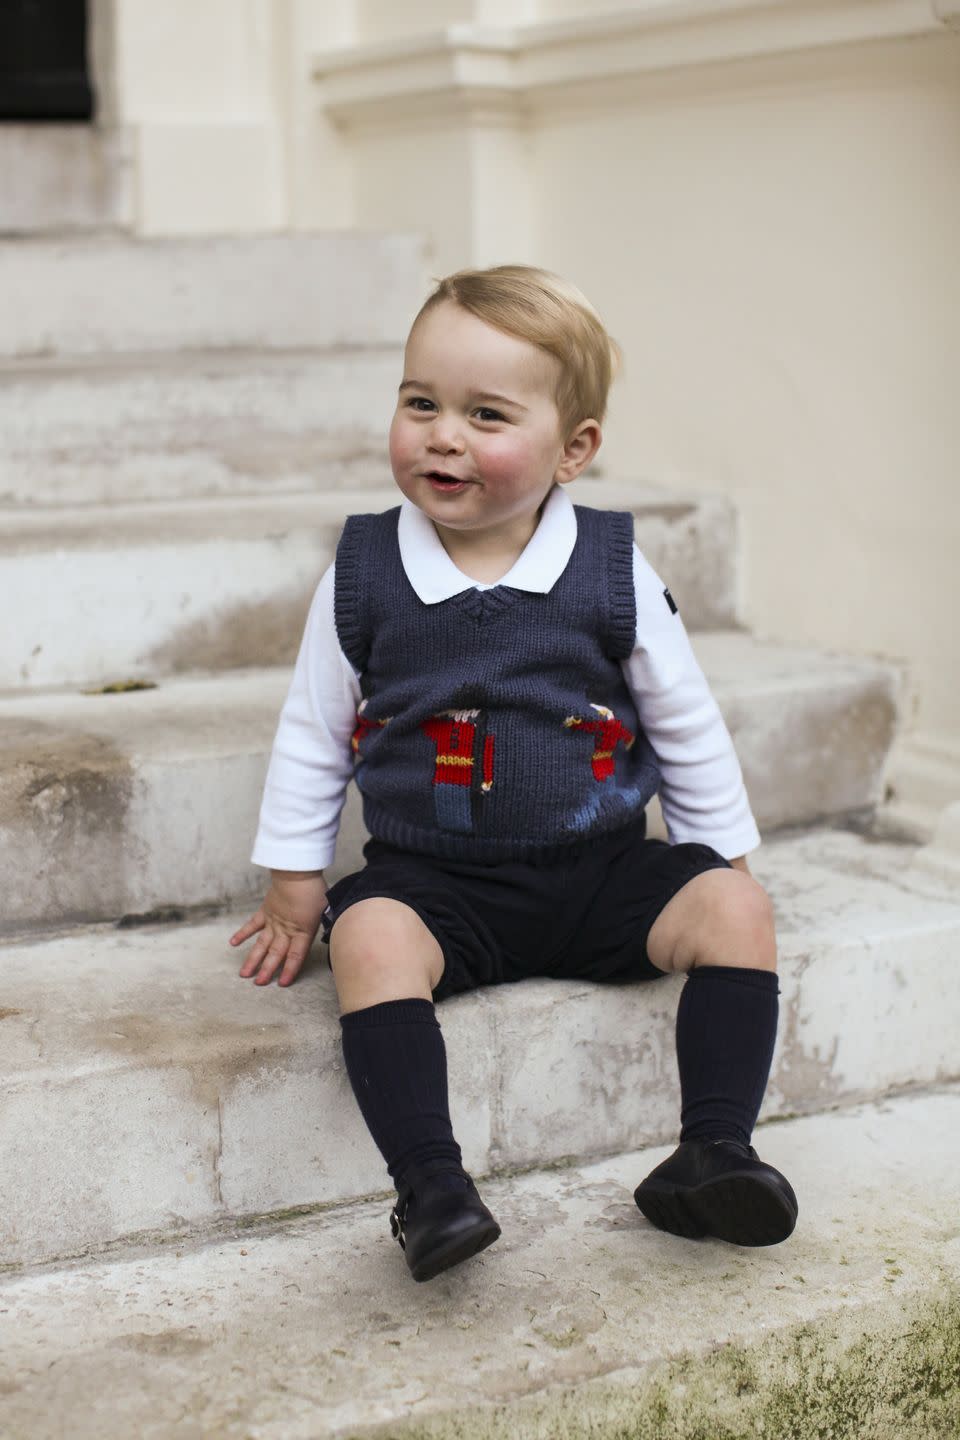 23) Even Prince George has a dress code.